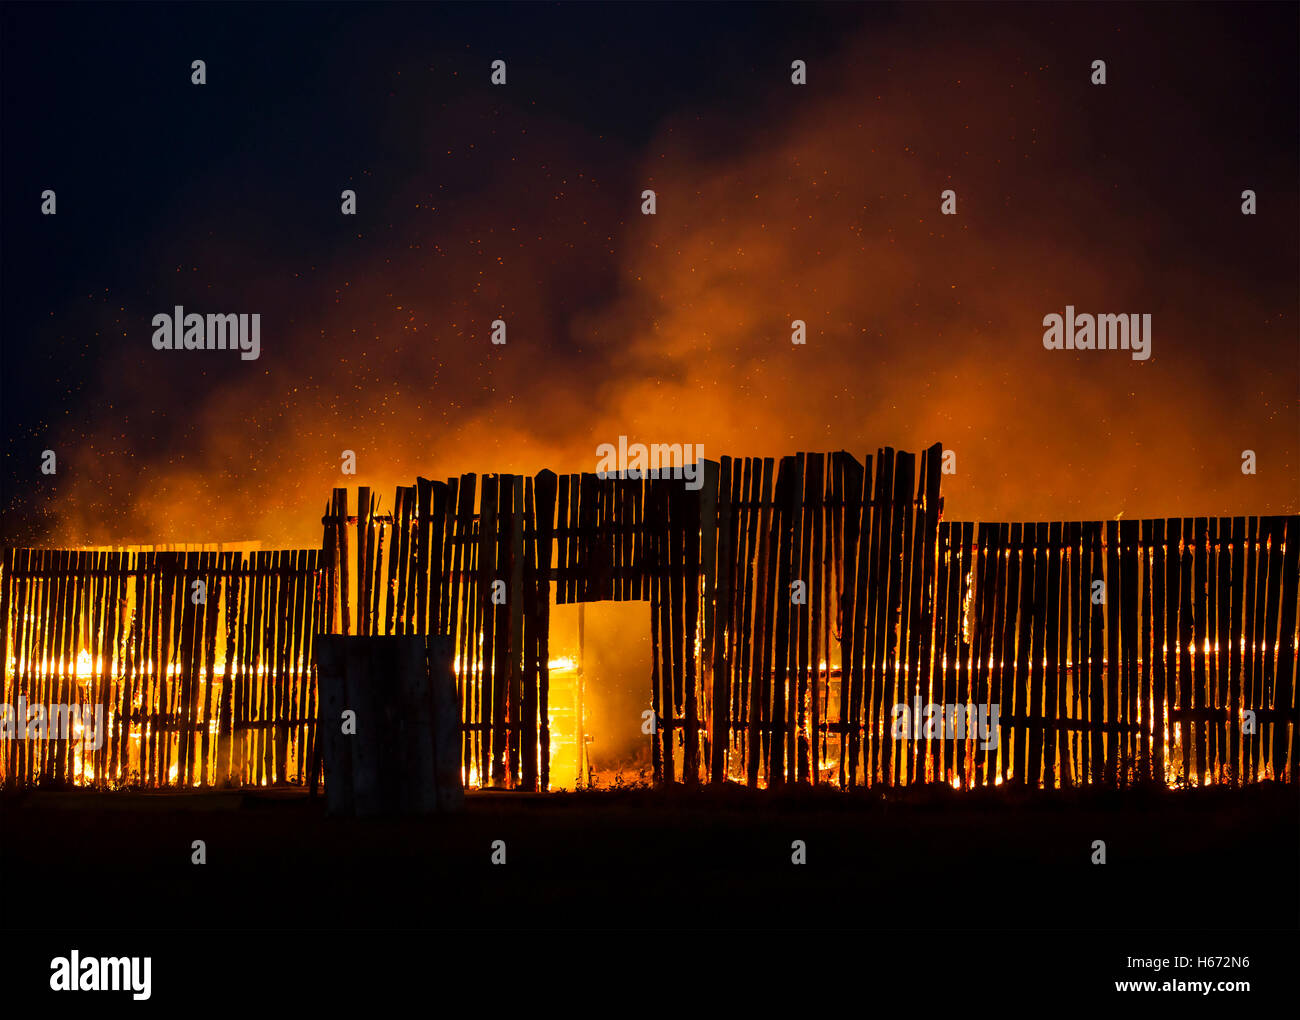 Wooden structure on fire with small sparks flying around. Stock Photo